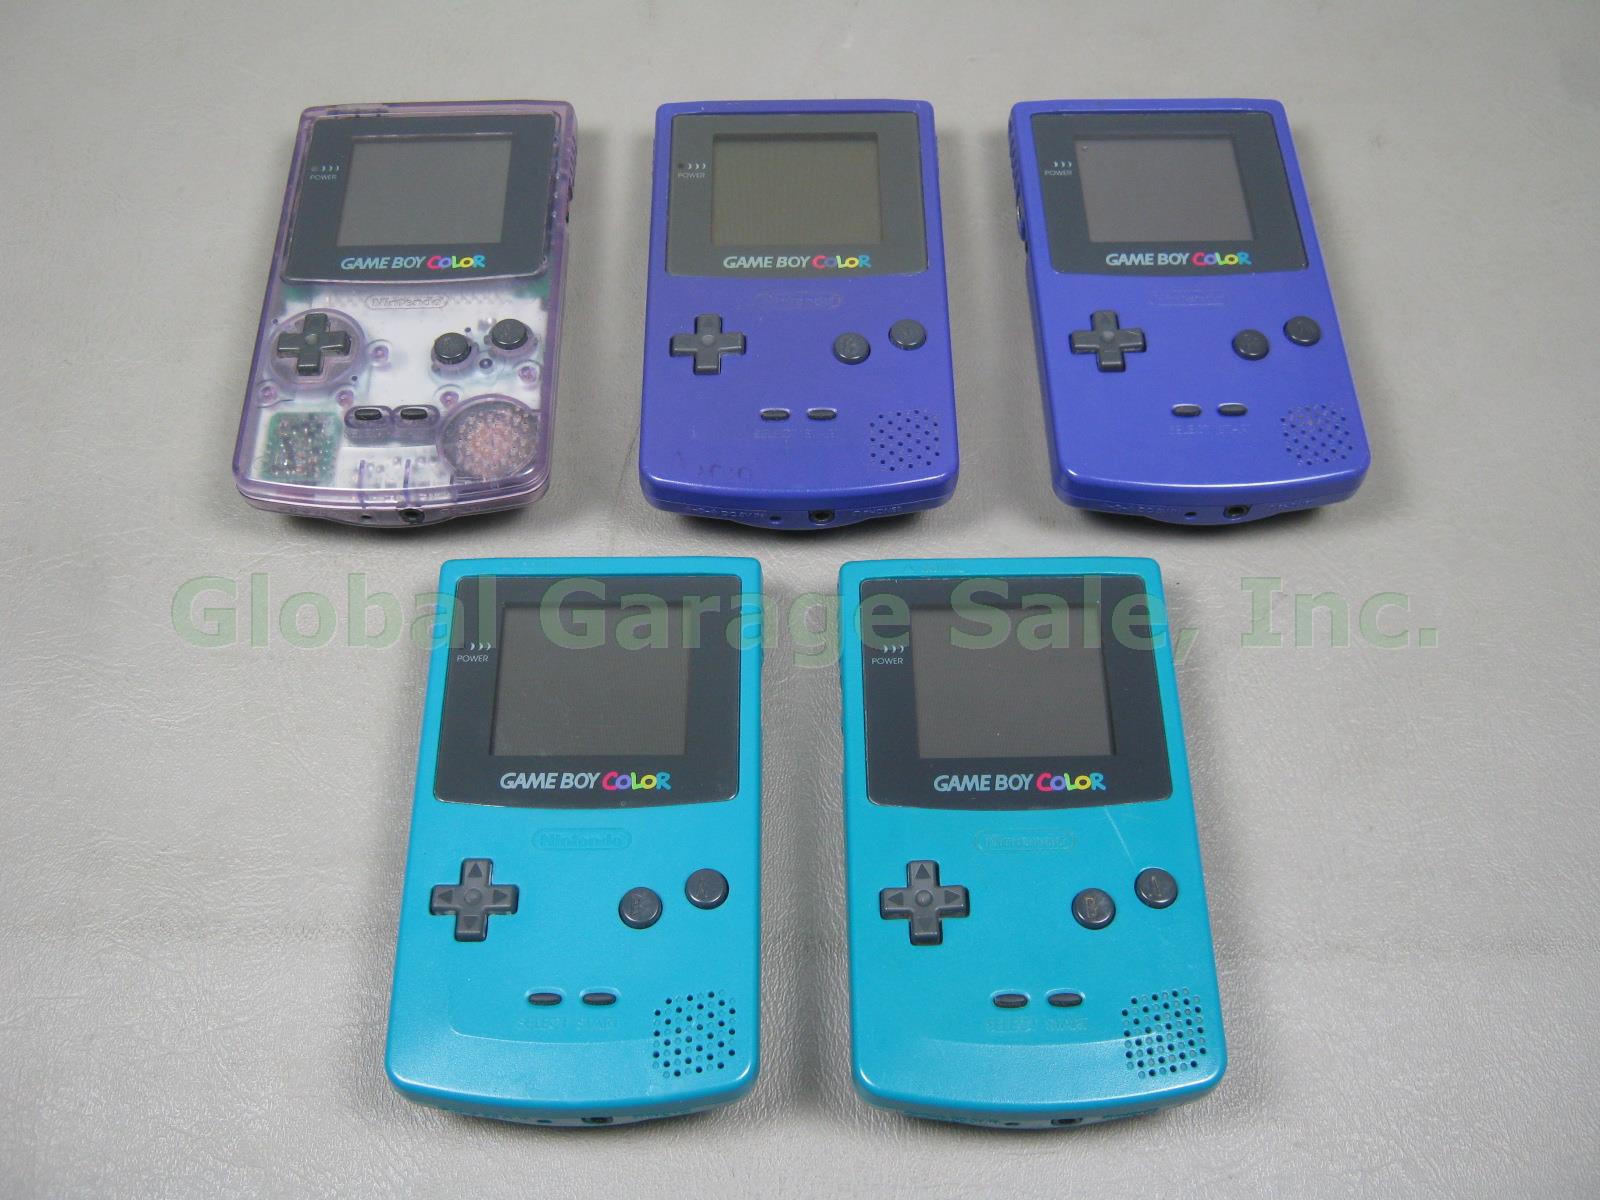 5 Tested Nintendo Gameboy Color GBC CGB-001 Console Lot Atomic Purple Grape Teal